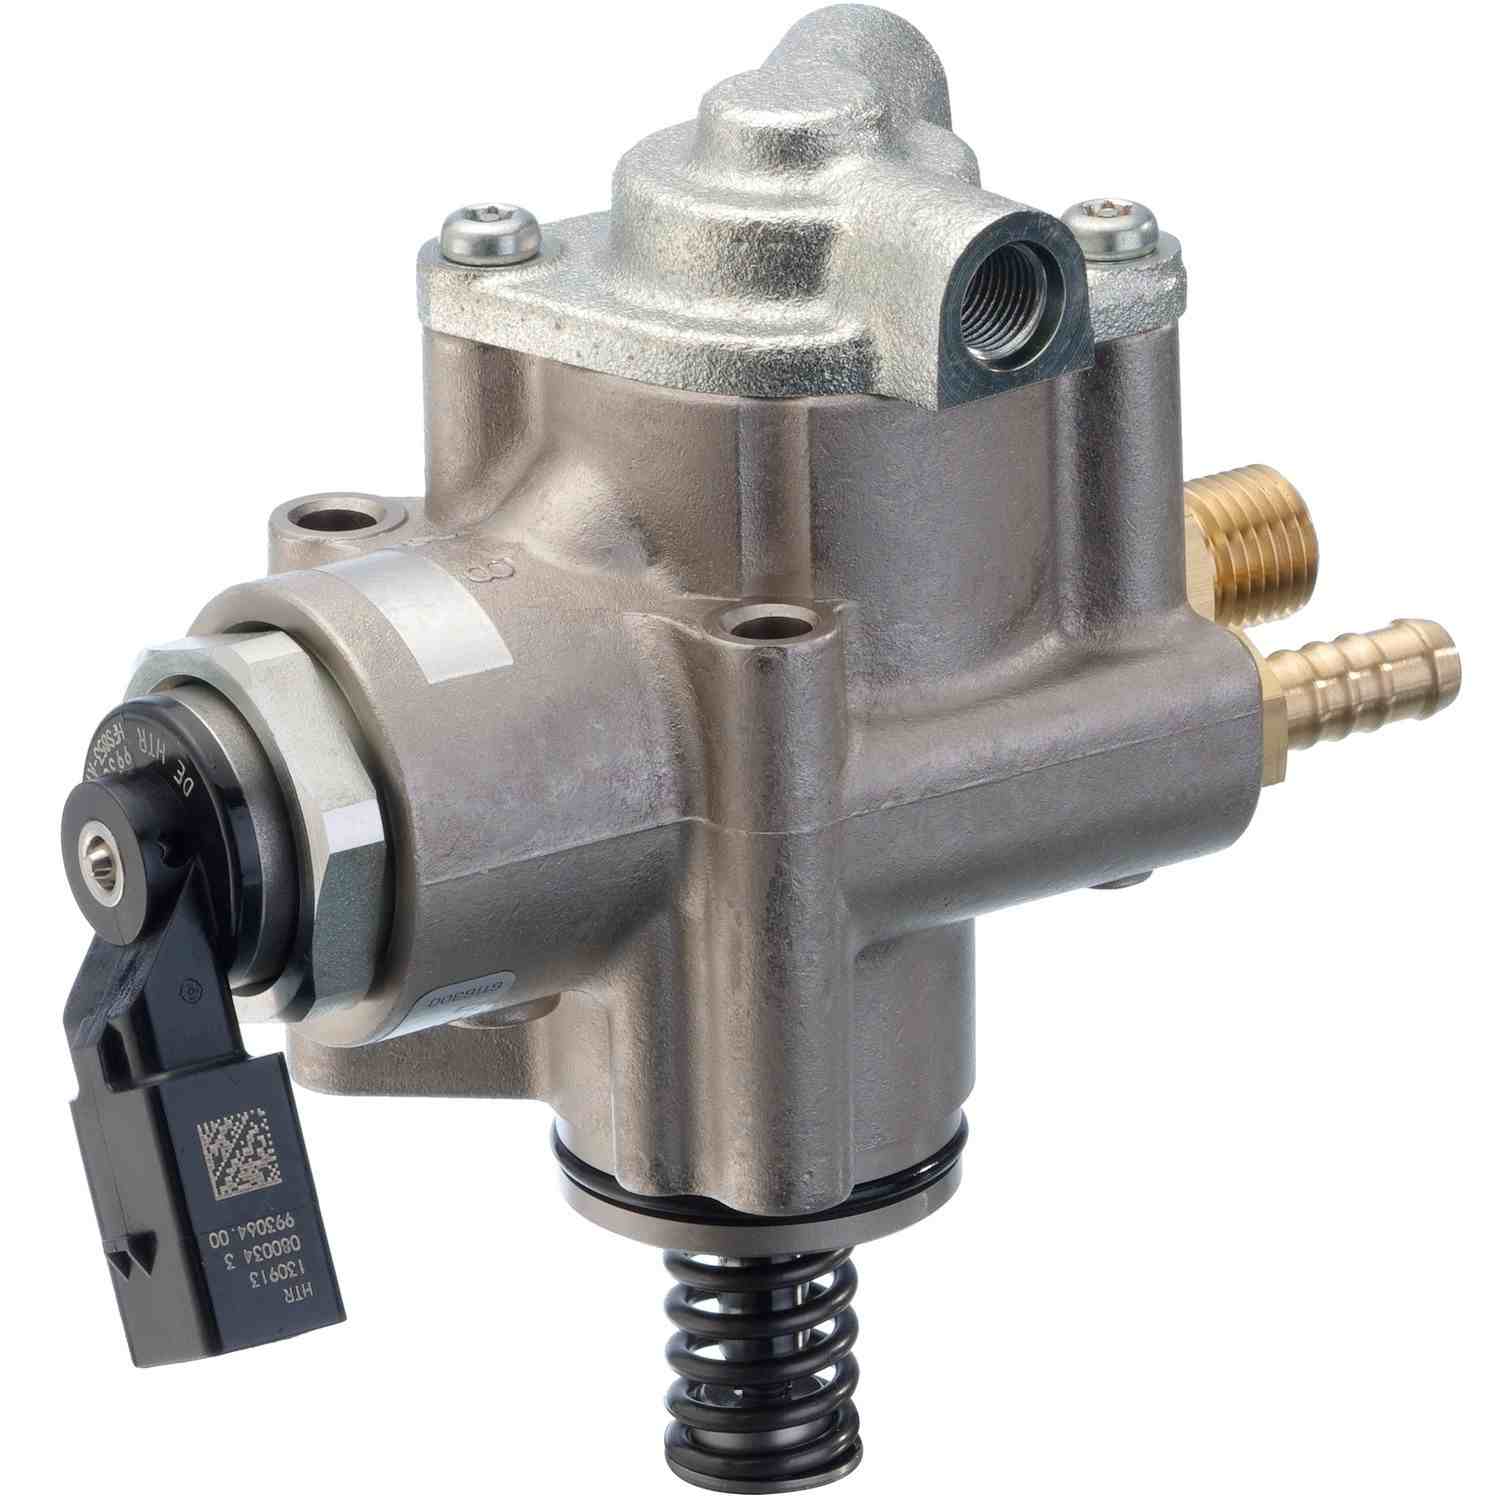 Pierburg distributed by Hella Direct Injection High Pressure Fuel Pump 7.06032.04.0